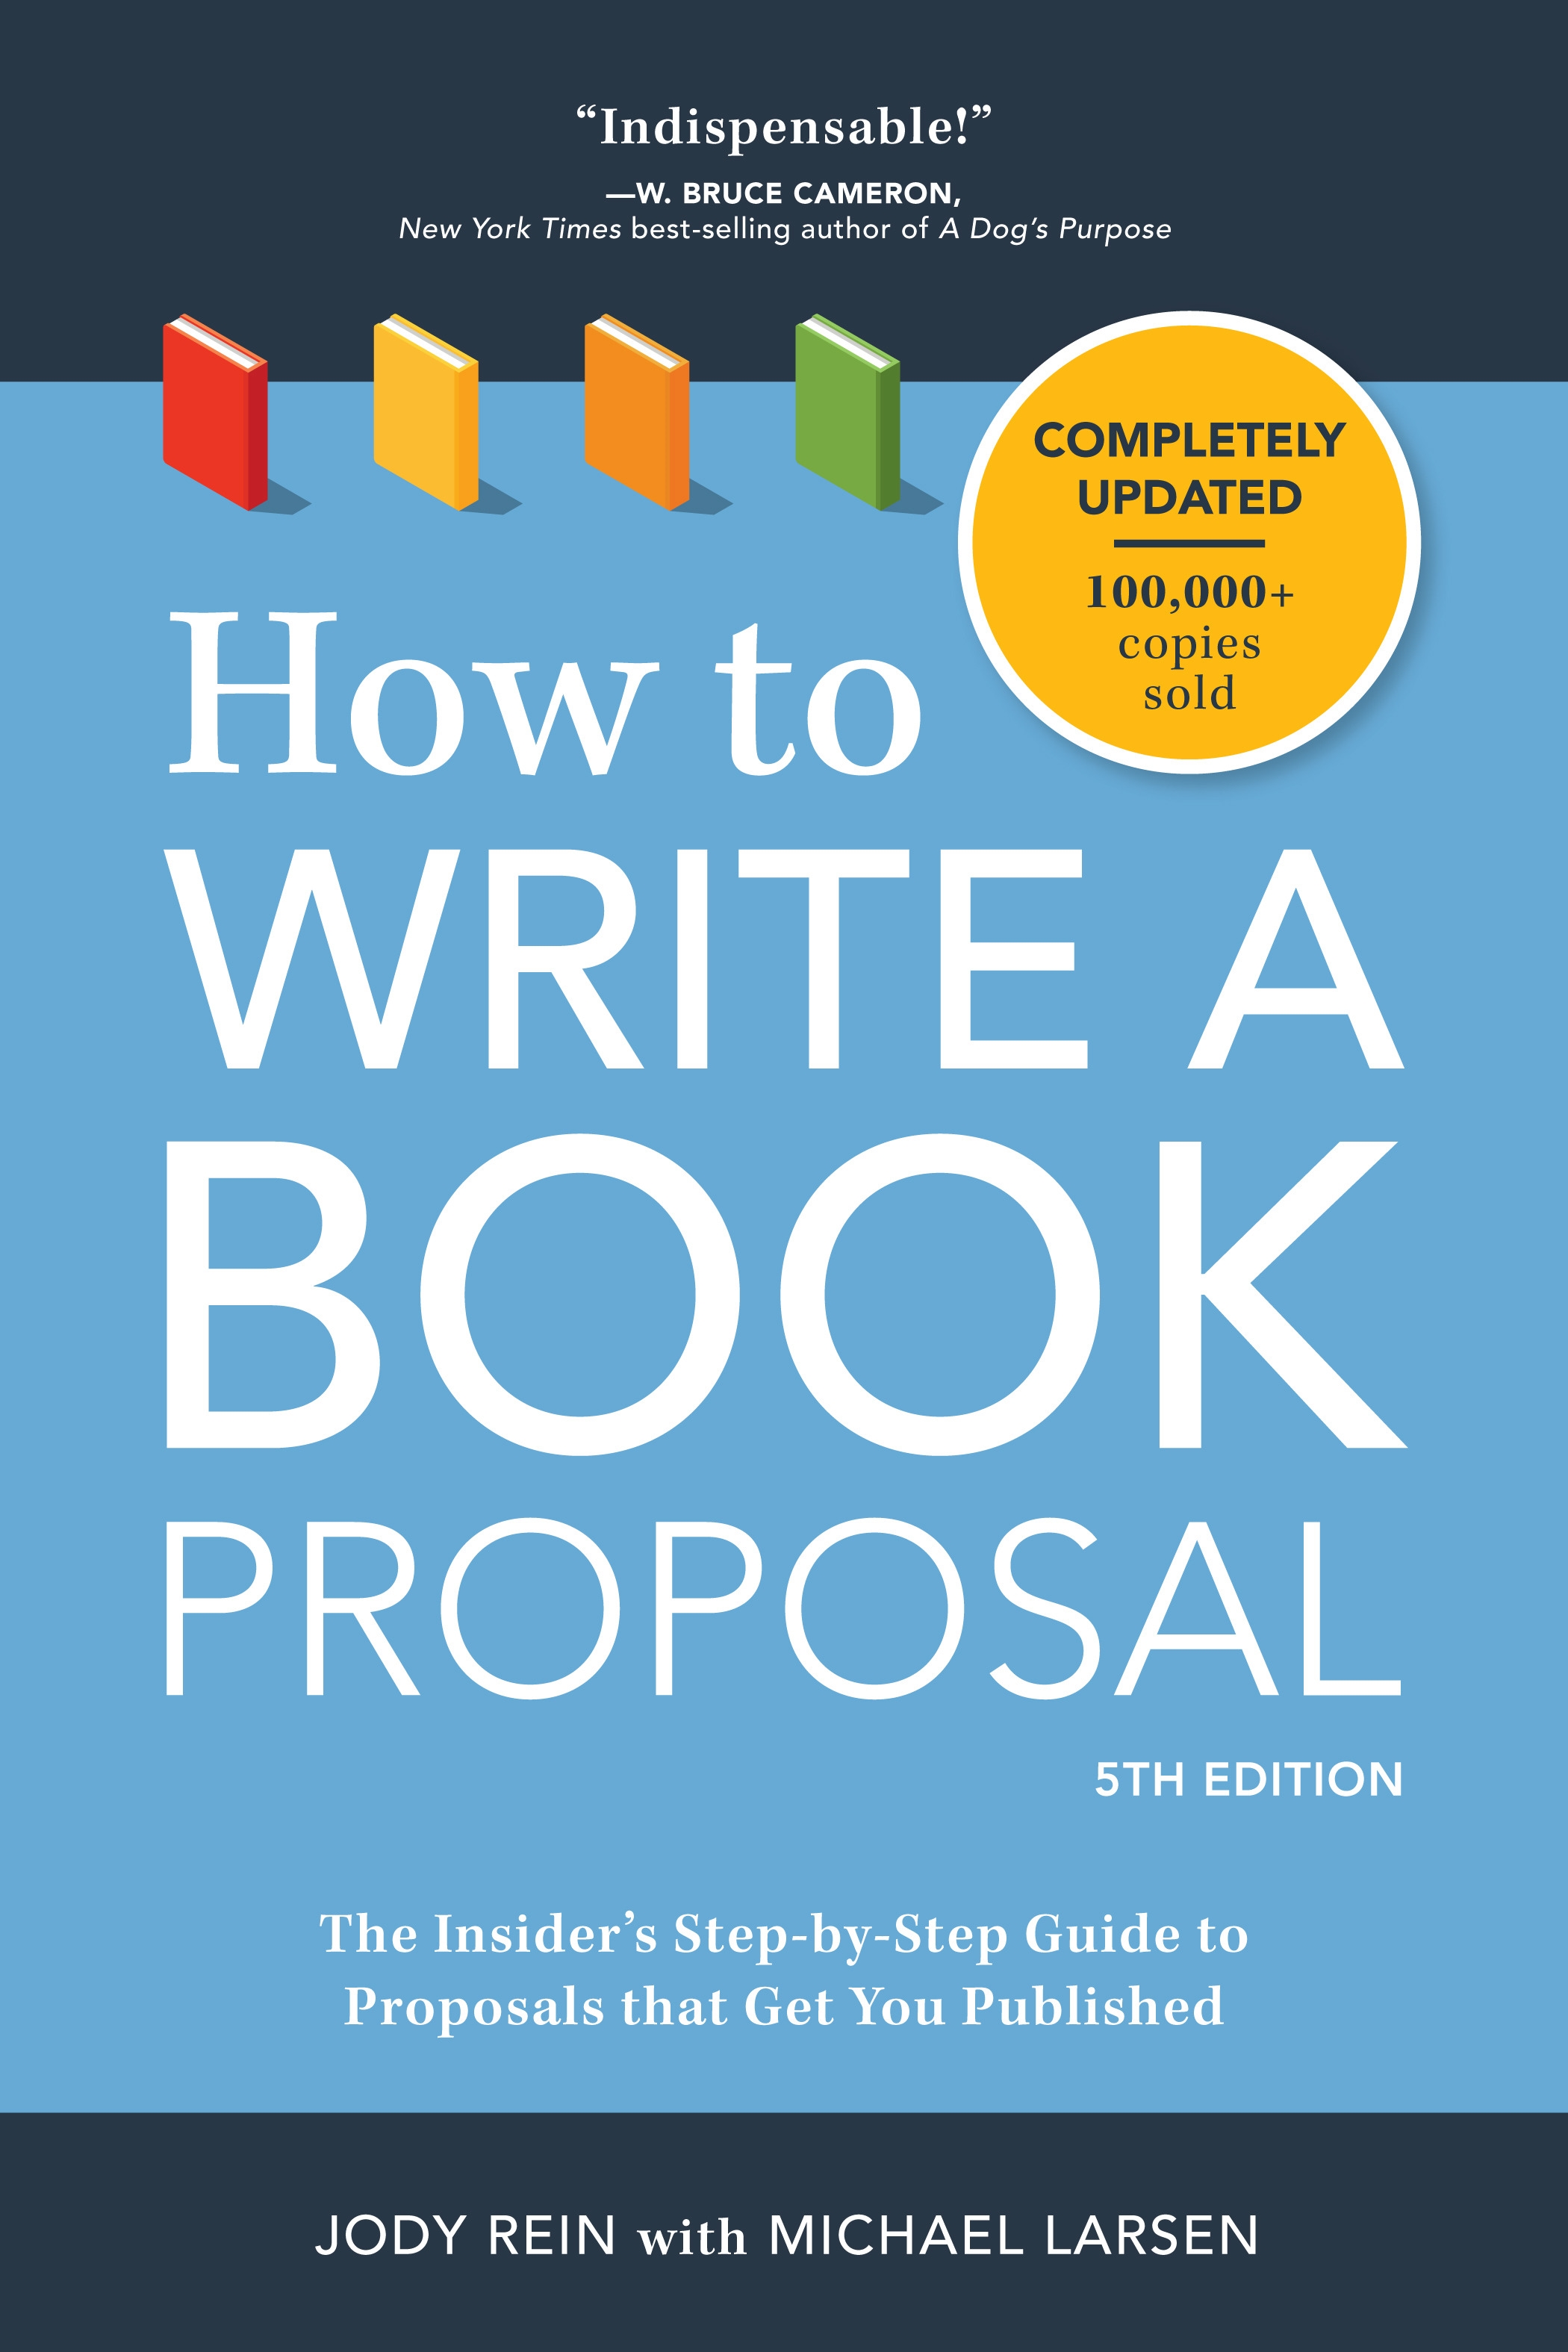 How to Write a Book Proposal by Jody Rein - Penguin Books Australia